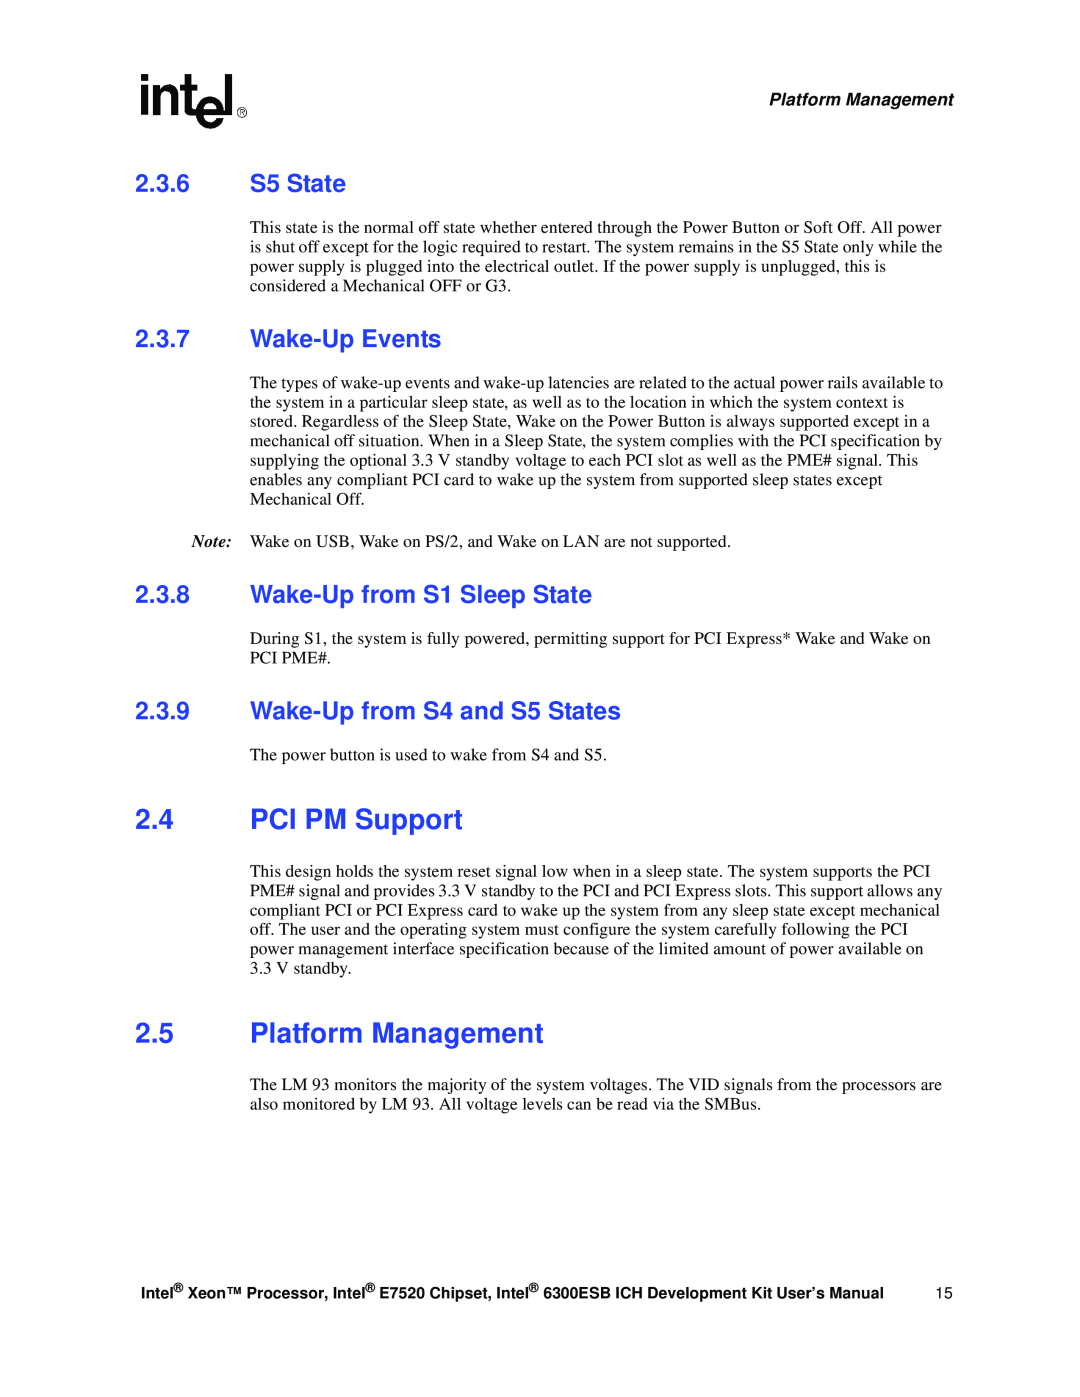 Intel 6300ESB ICH, Xeon PCI PM Support, Platform Management, 2.3.6 S5 State, Wake-Up Events, Wake-Up from S1 Sleep State 